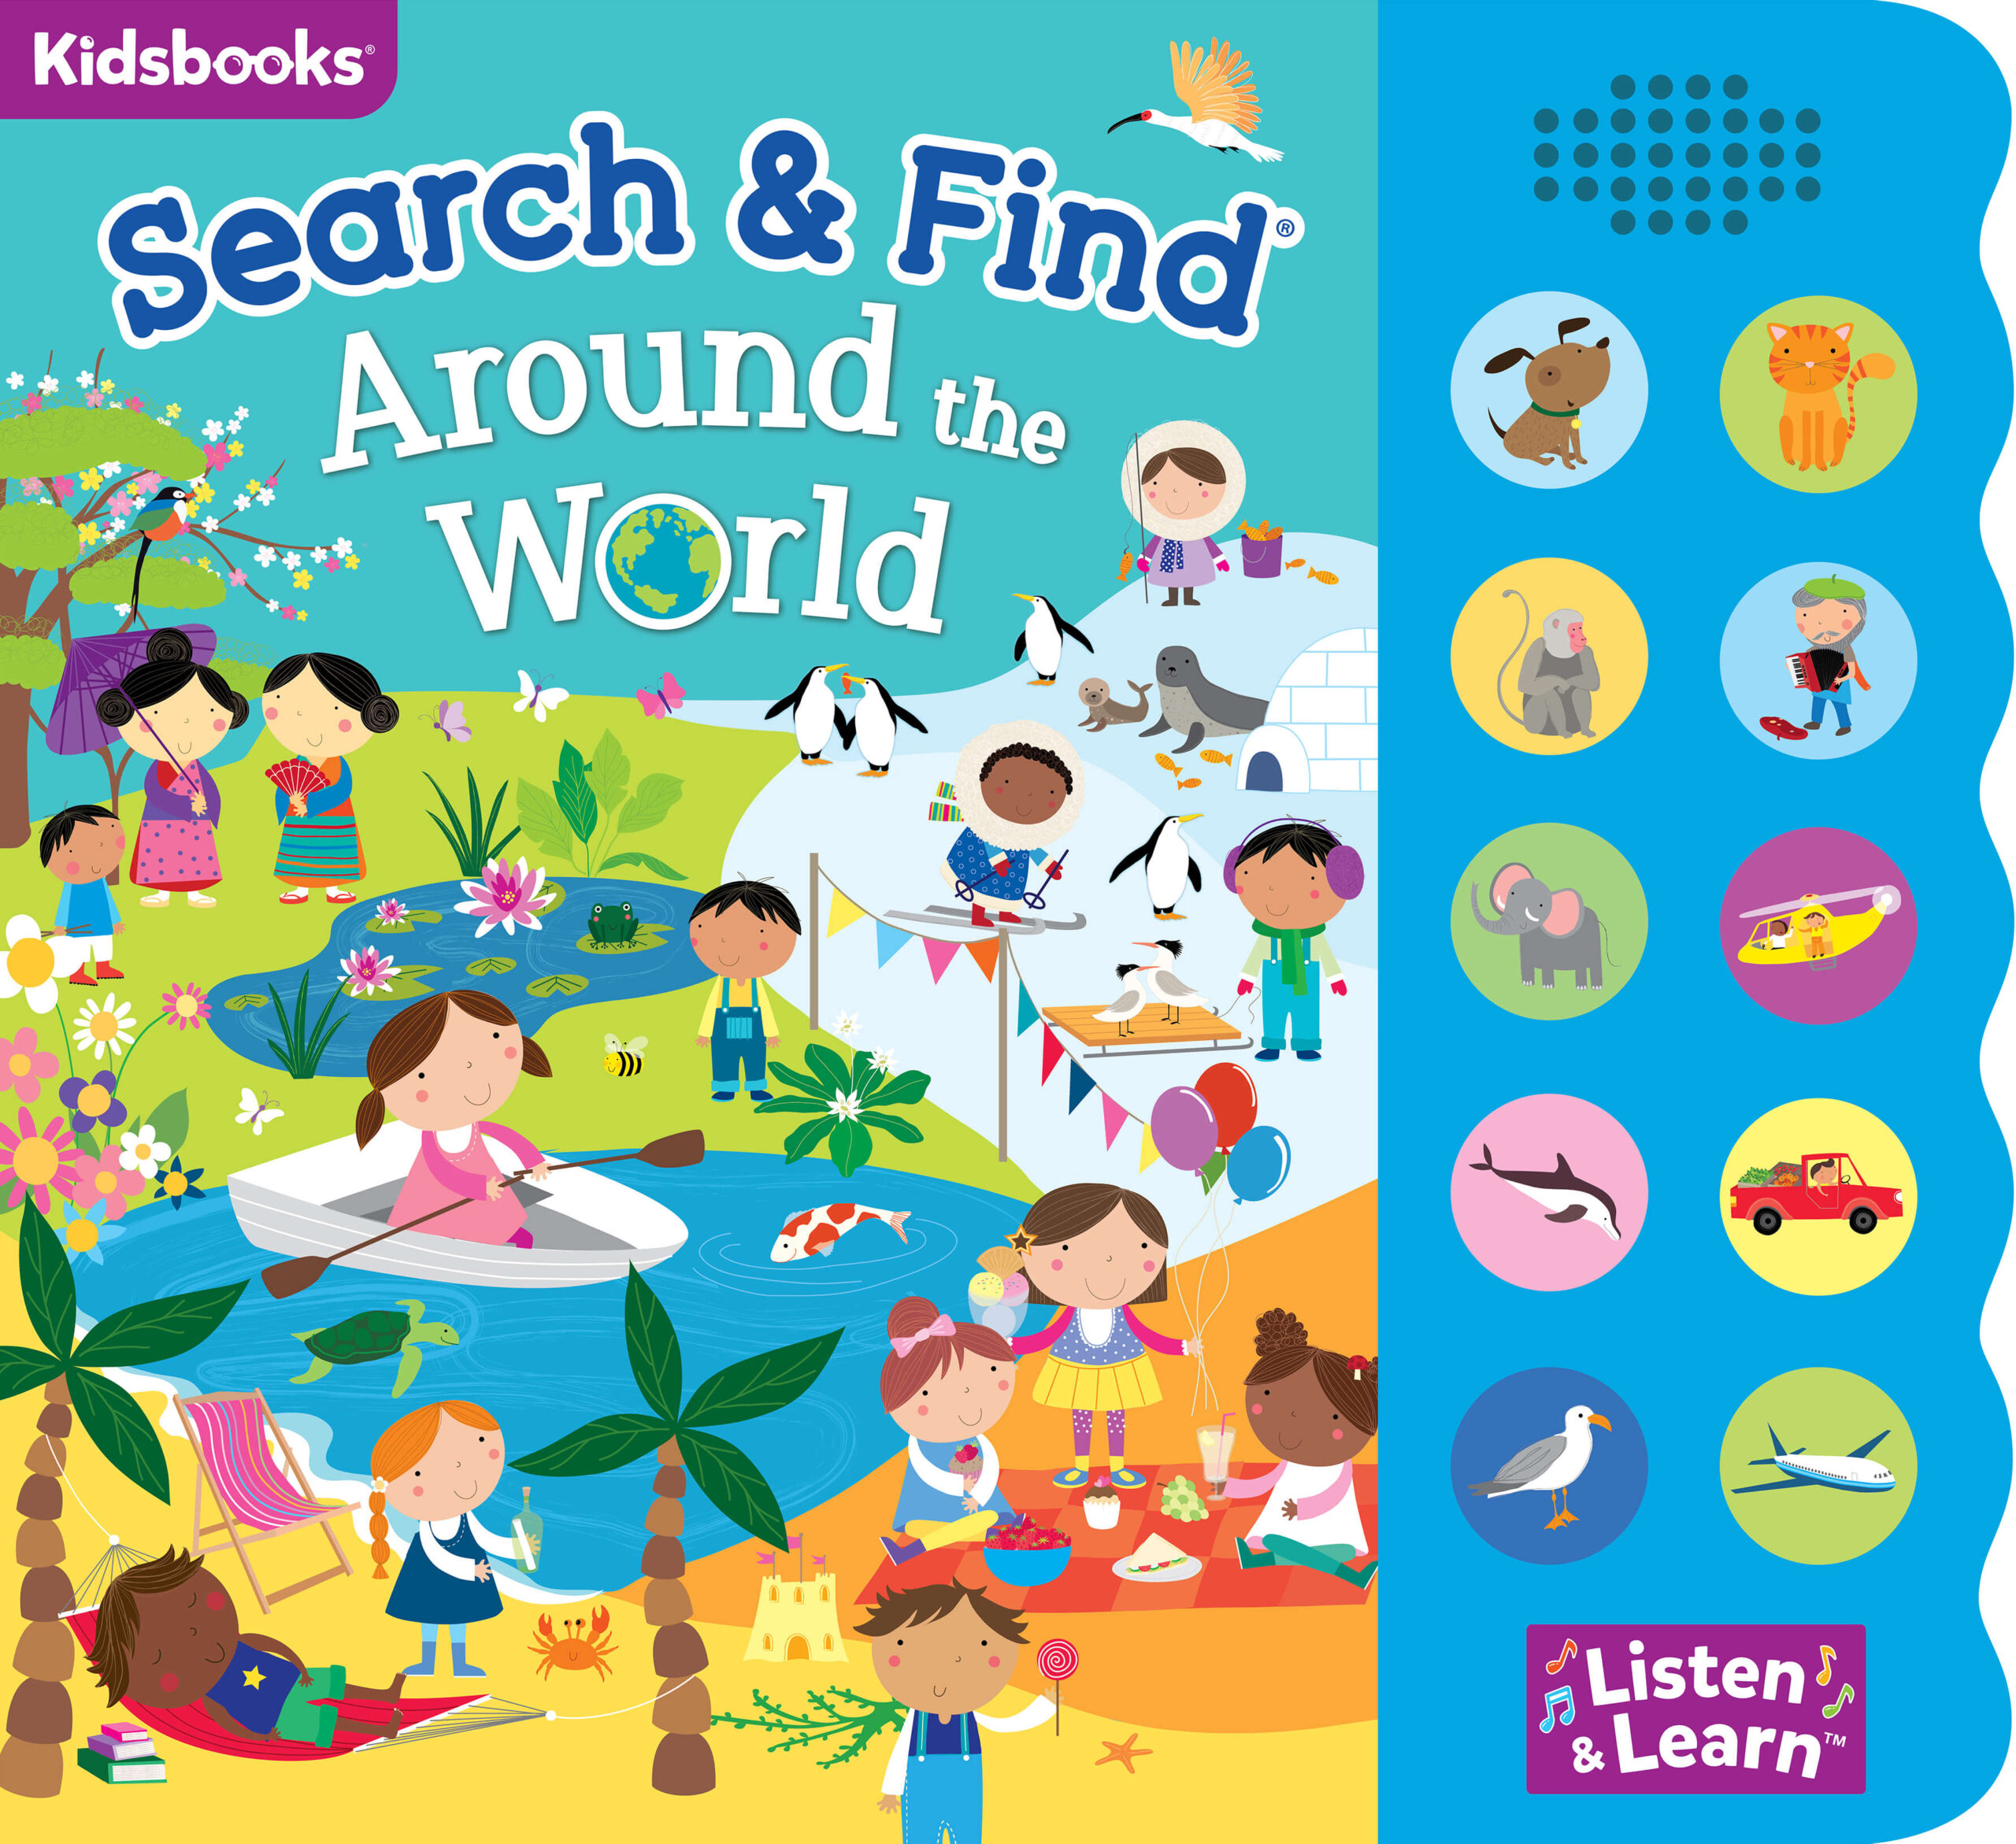 Where In the World is Wyatt?: A Cultural Search-and-Find Journey Around the  World Starring Wyatt! (Personalized Children's Book Gift)